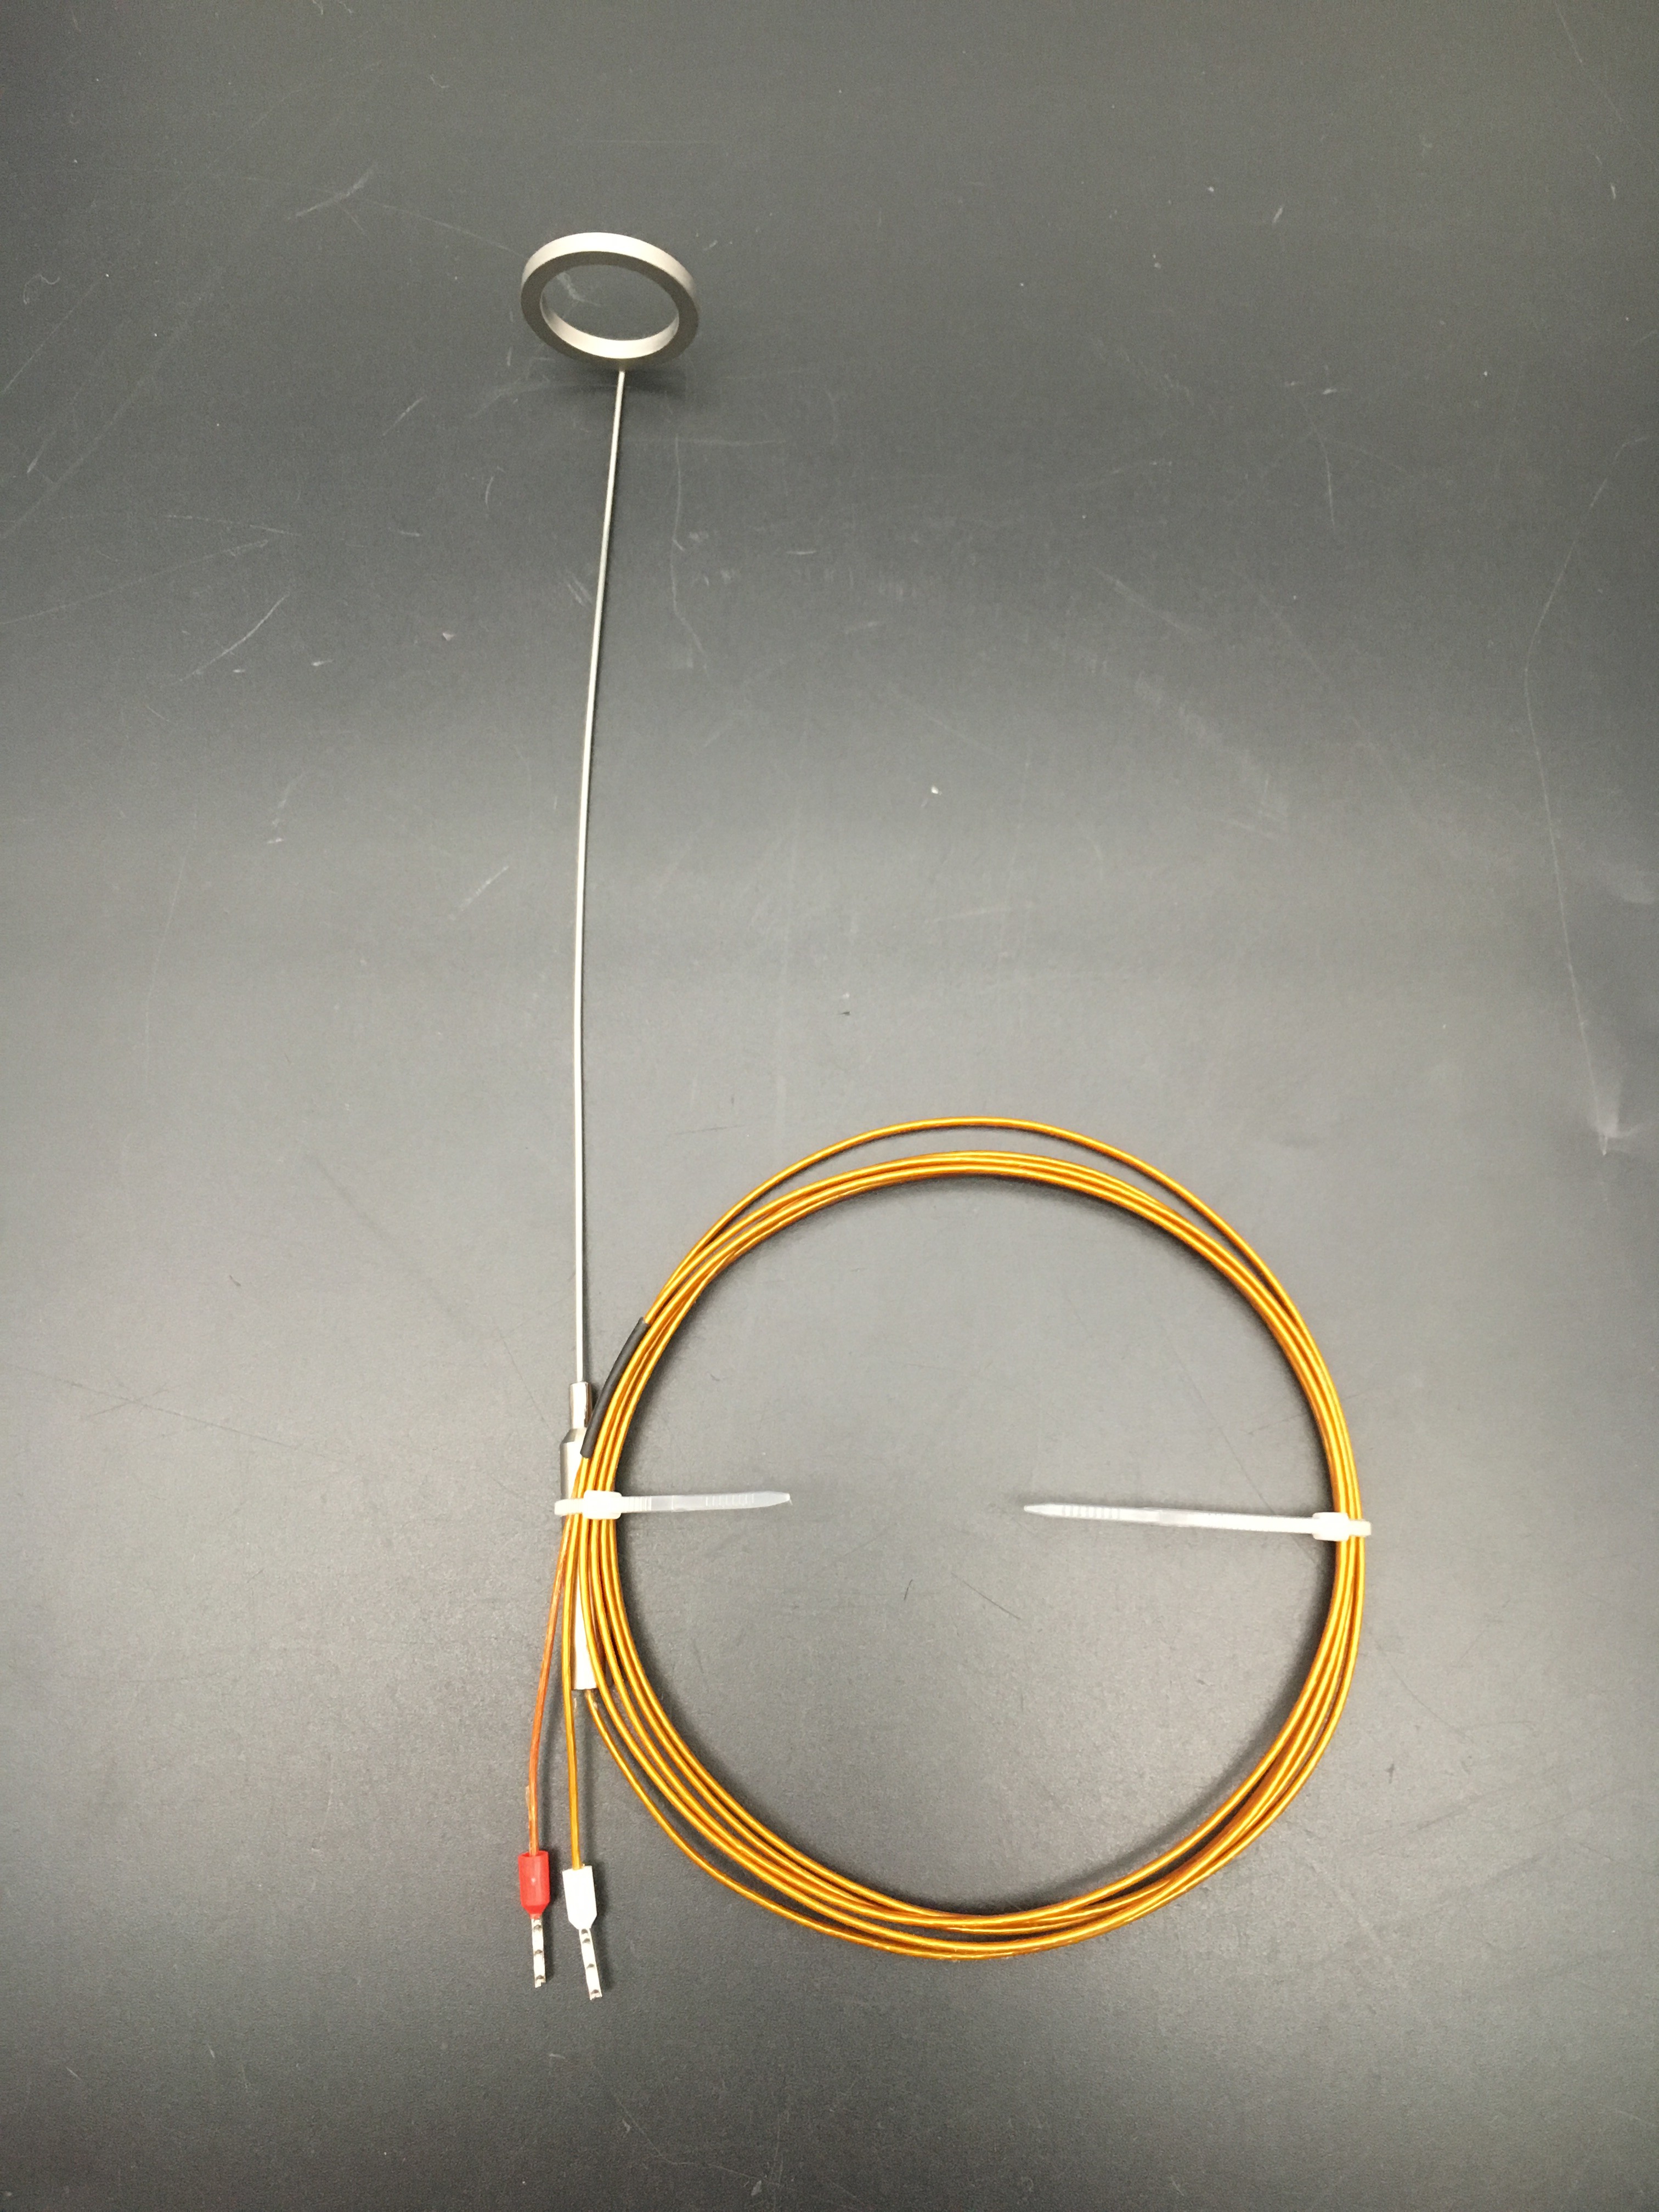 Ungrounded Thermocouple Components J Type Thermocouple Ring Diameter 25mm